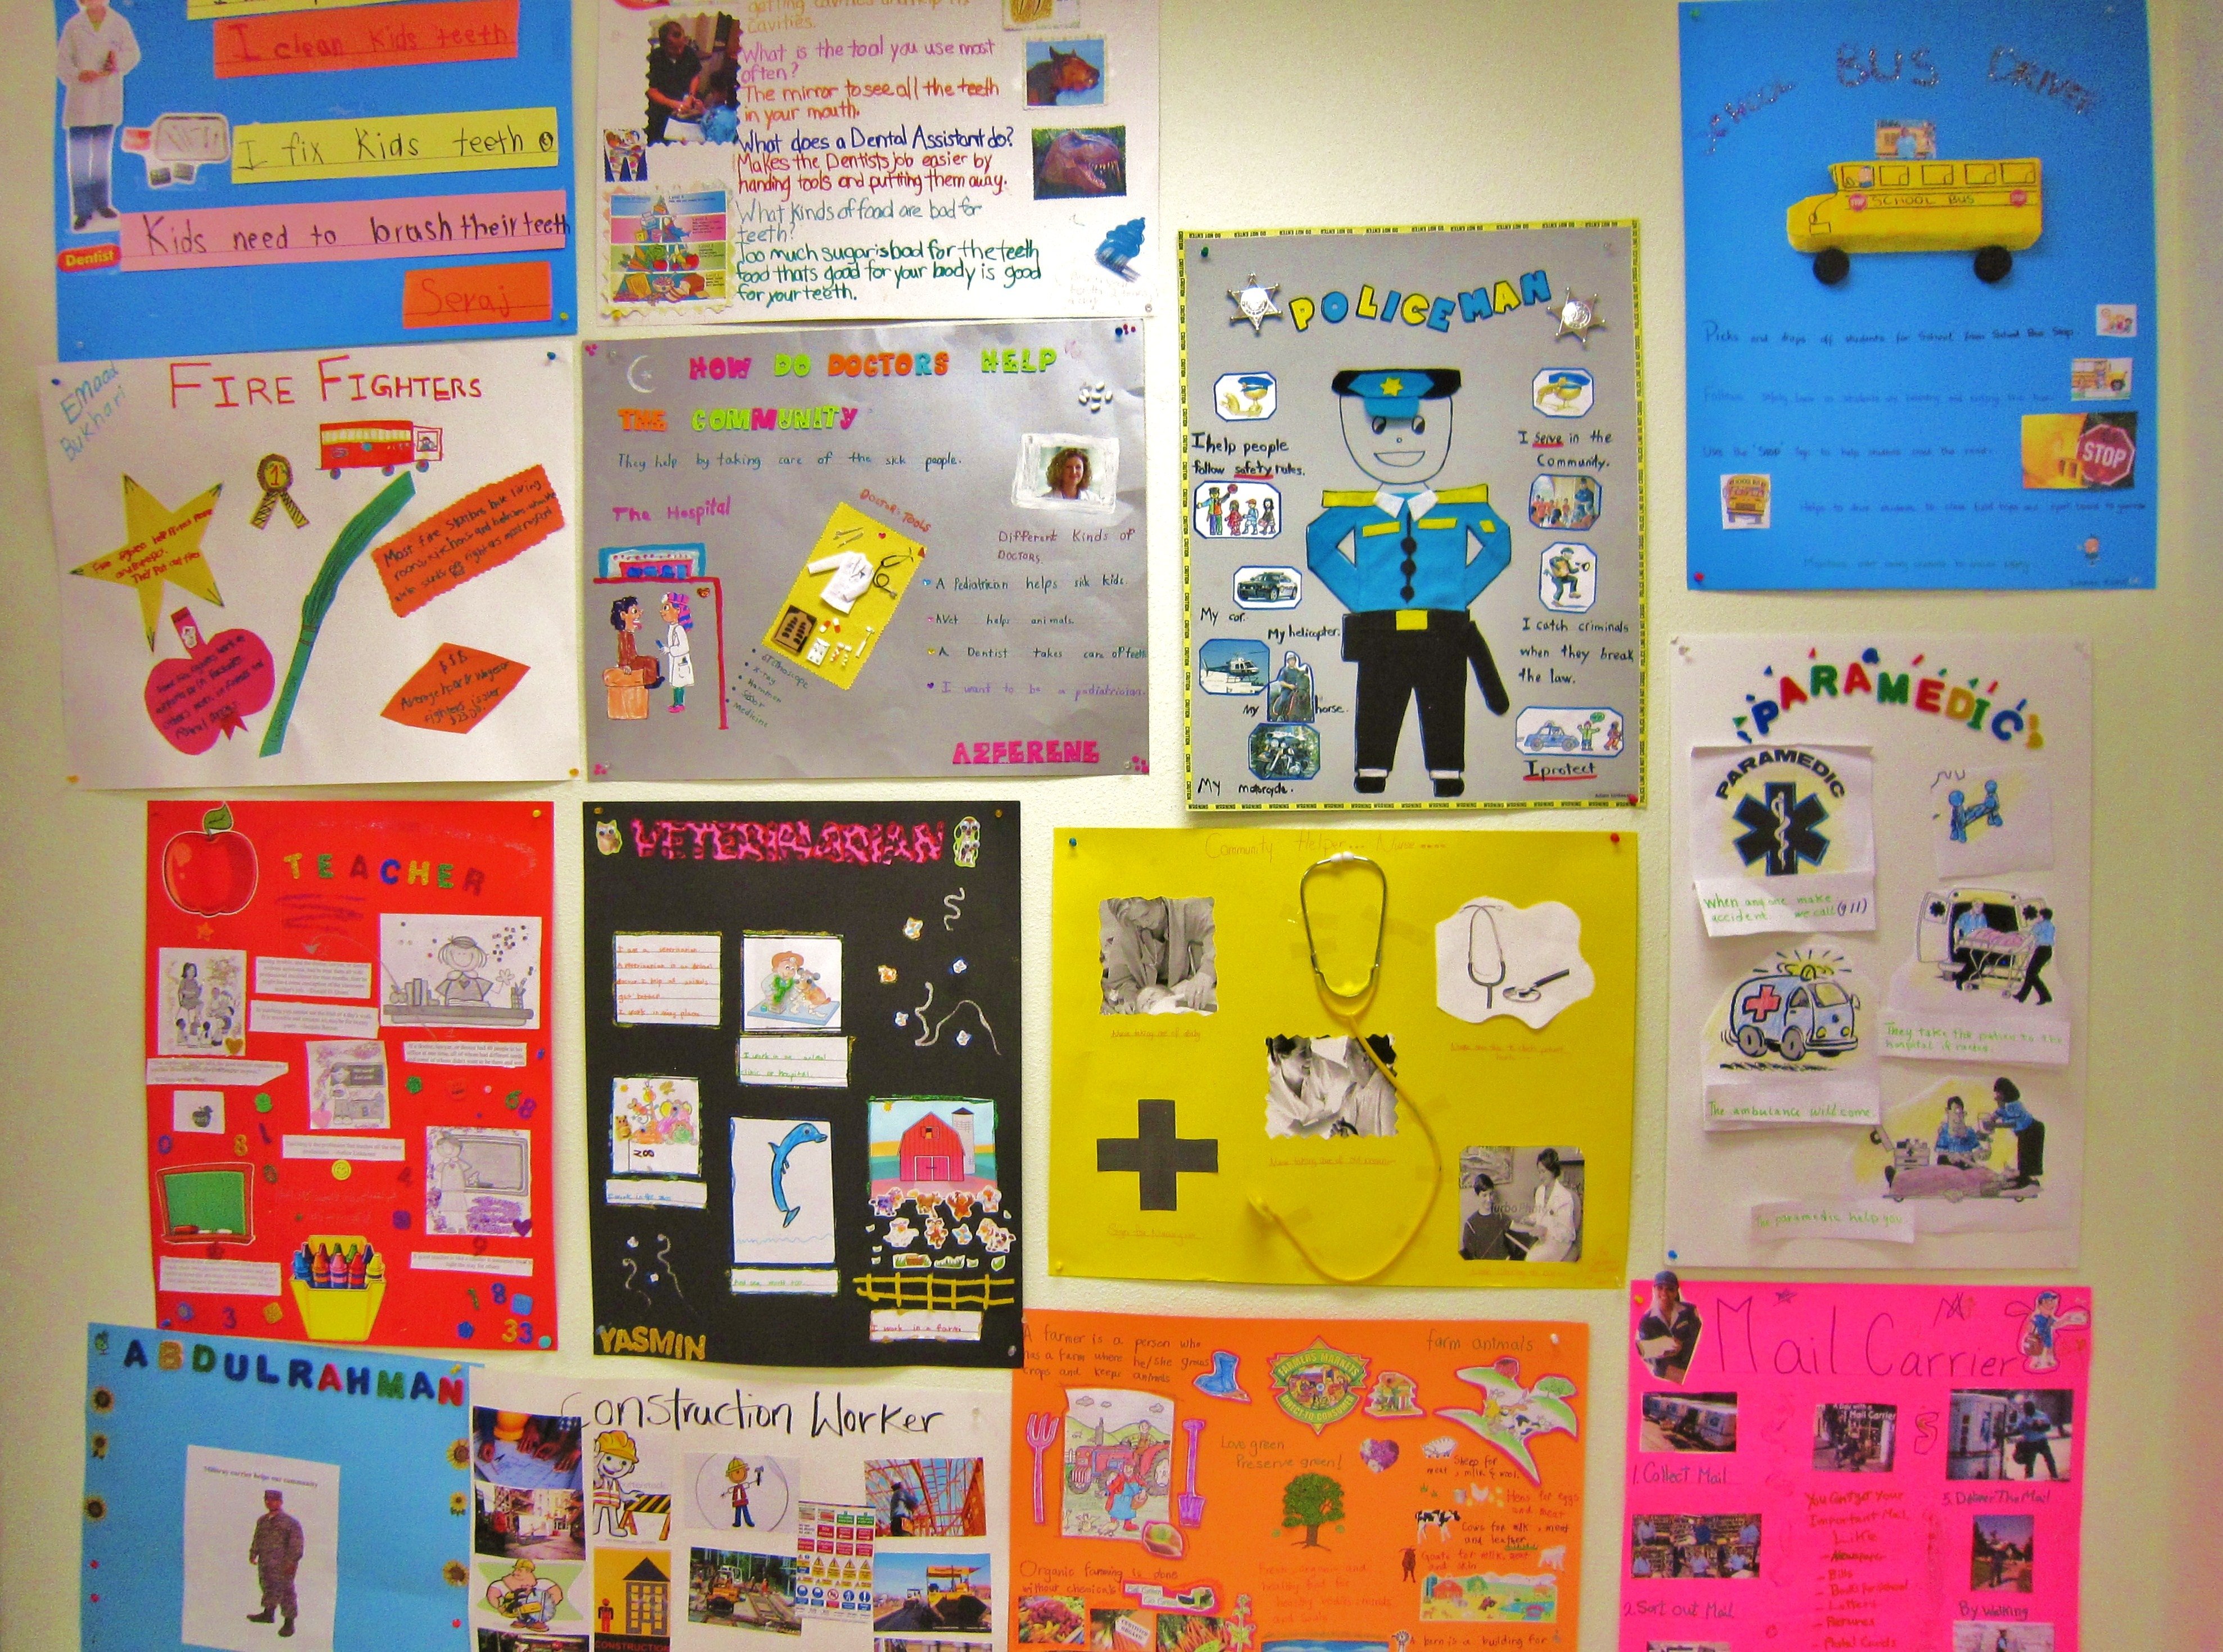 presentation creative poster ideas for school projects